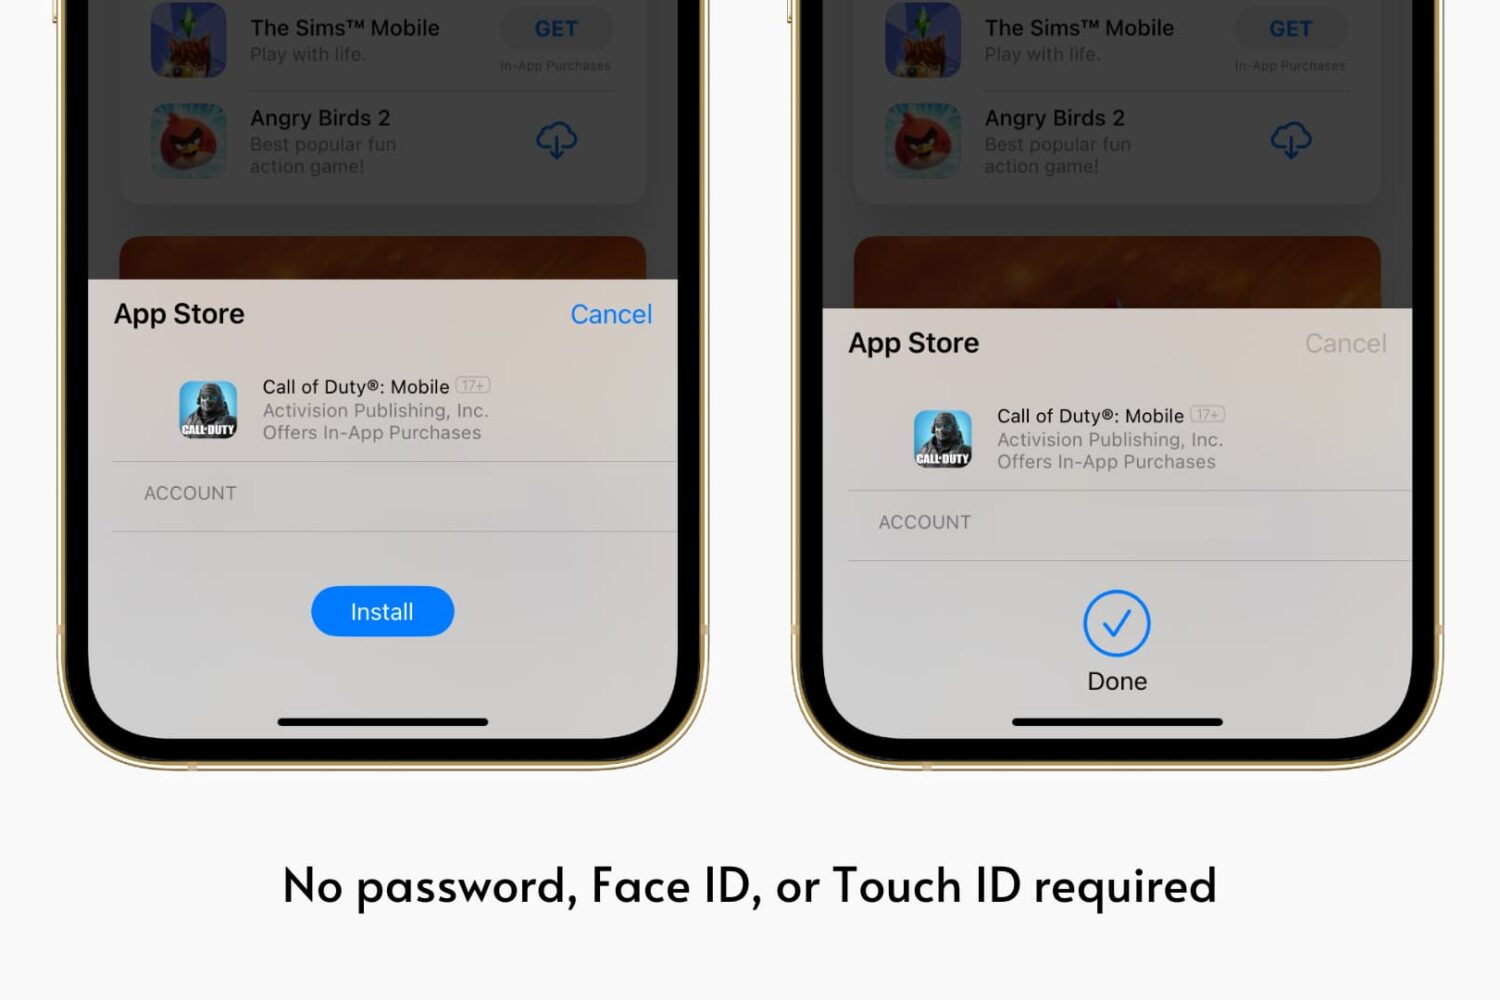 Download iPhone apps without Face ID or password